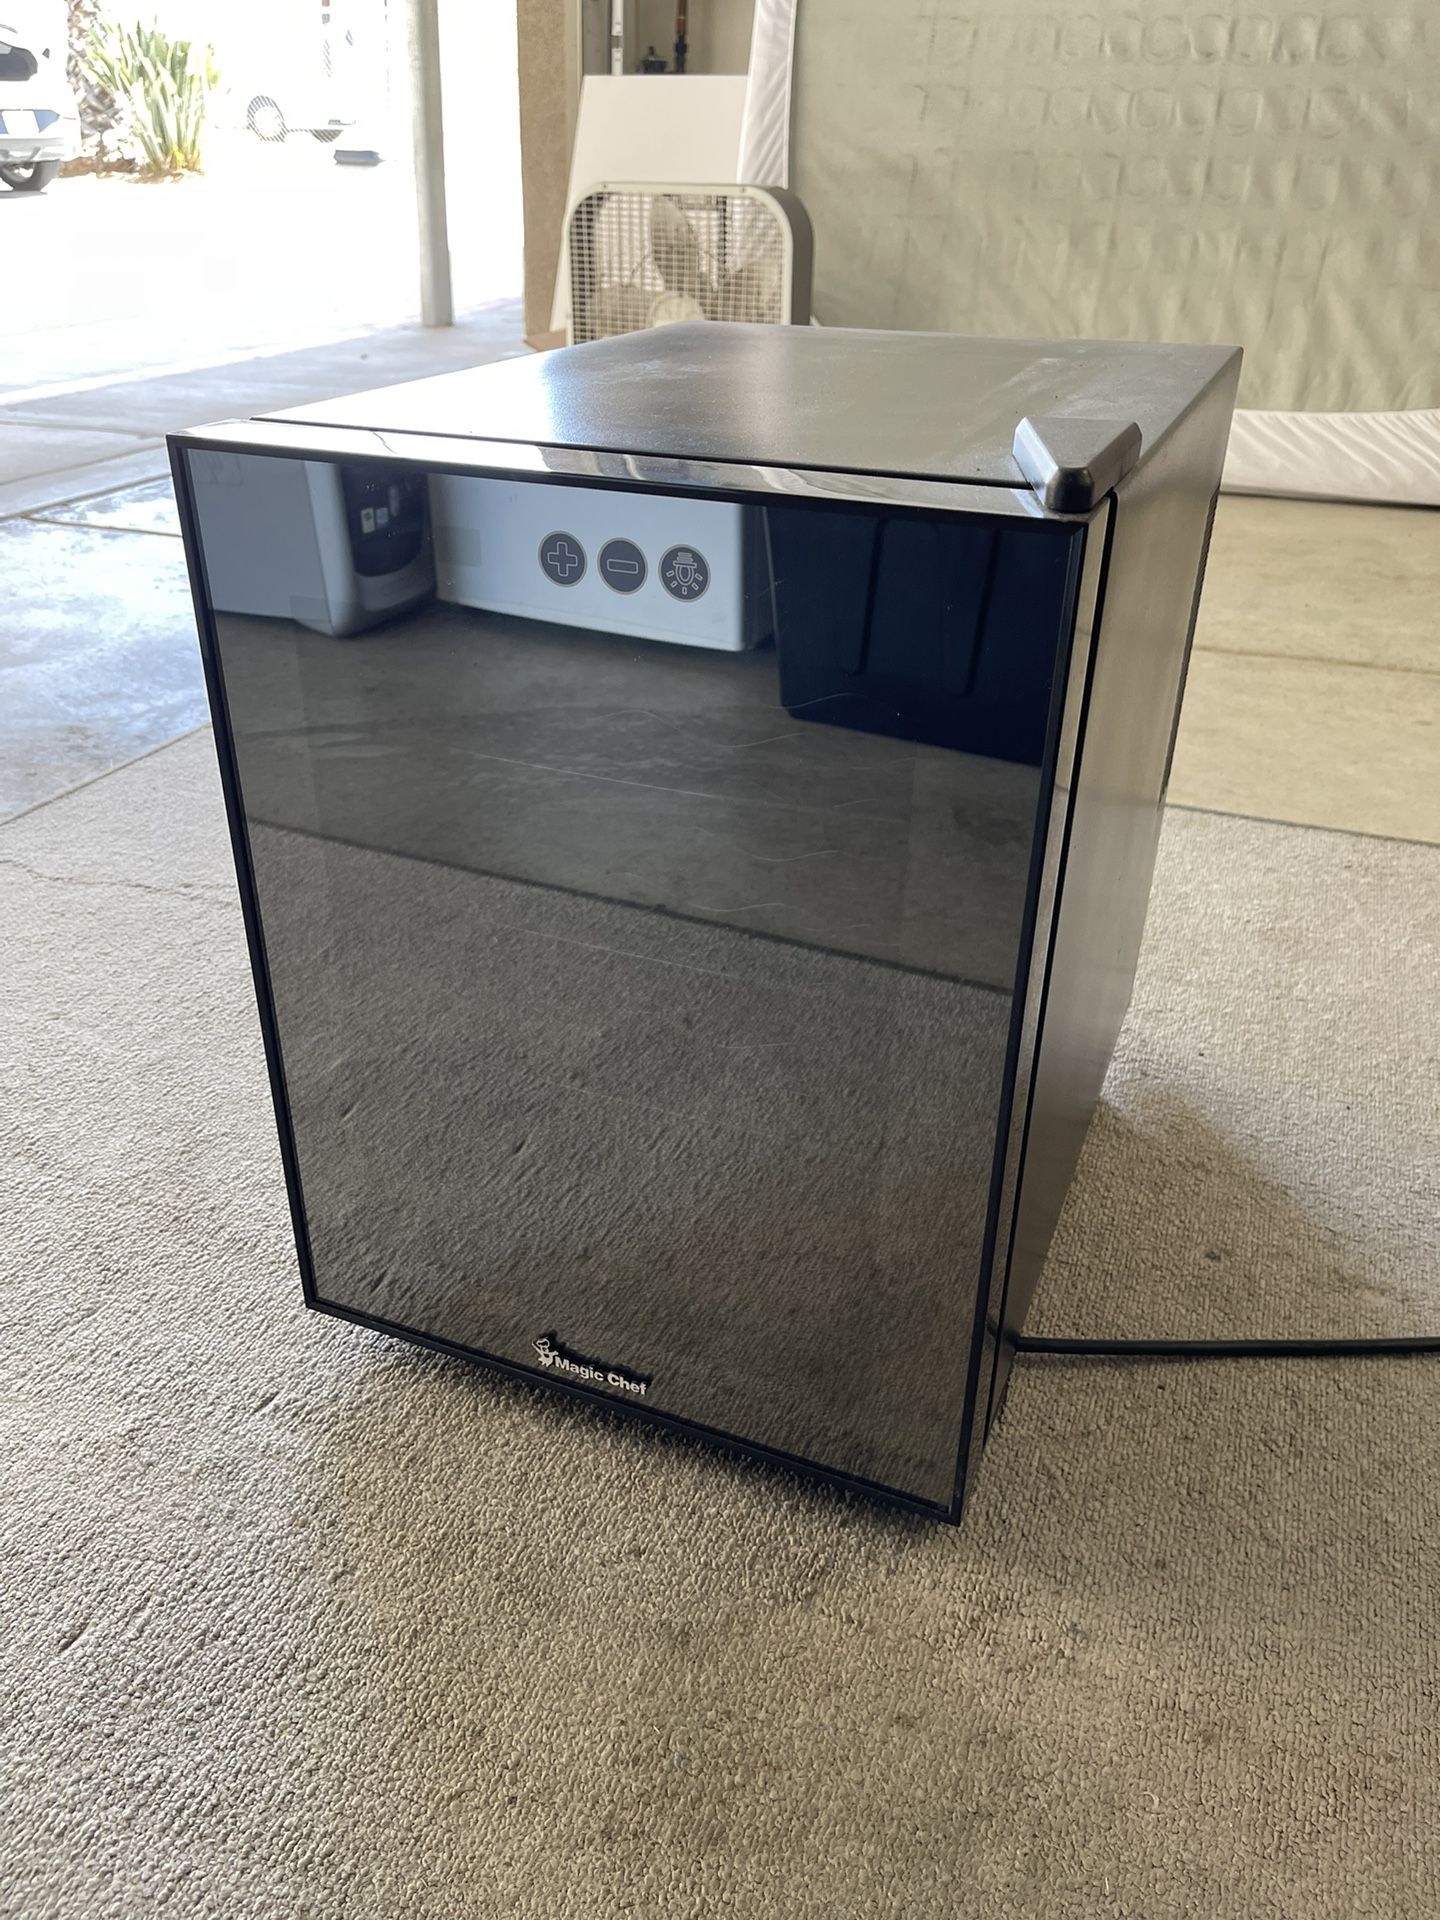 Magic Chef wine refrigerator (cooler)…works perfectly! 